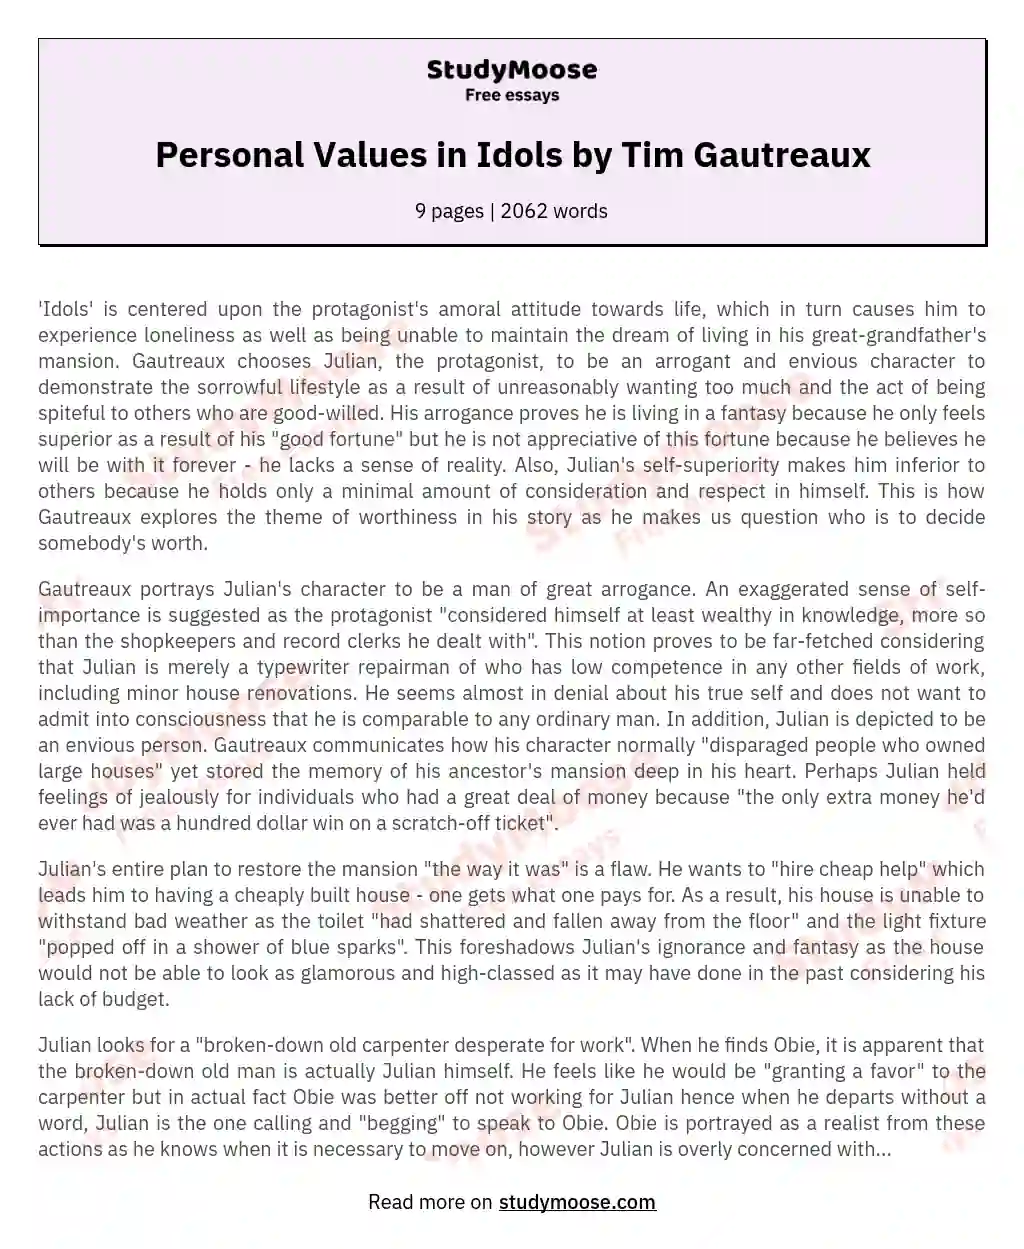 Personal Values in Idols by Tim Gautreaux essay